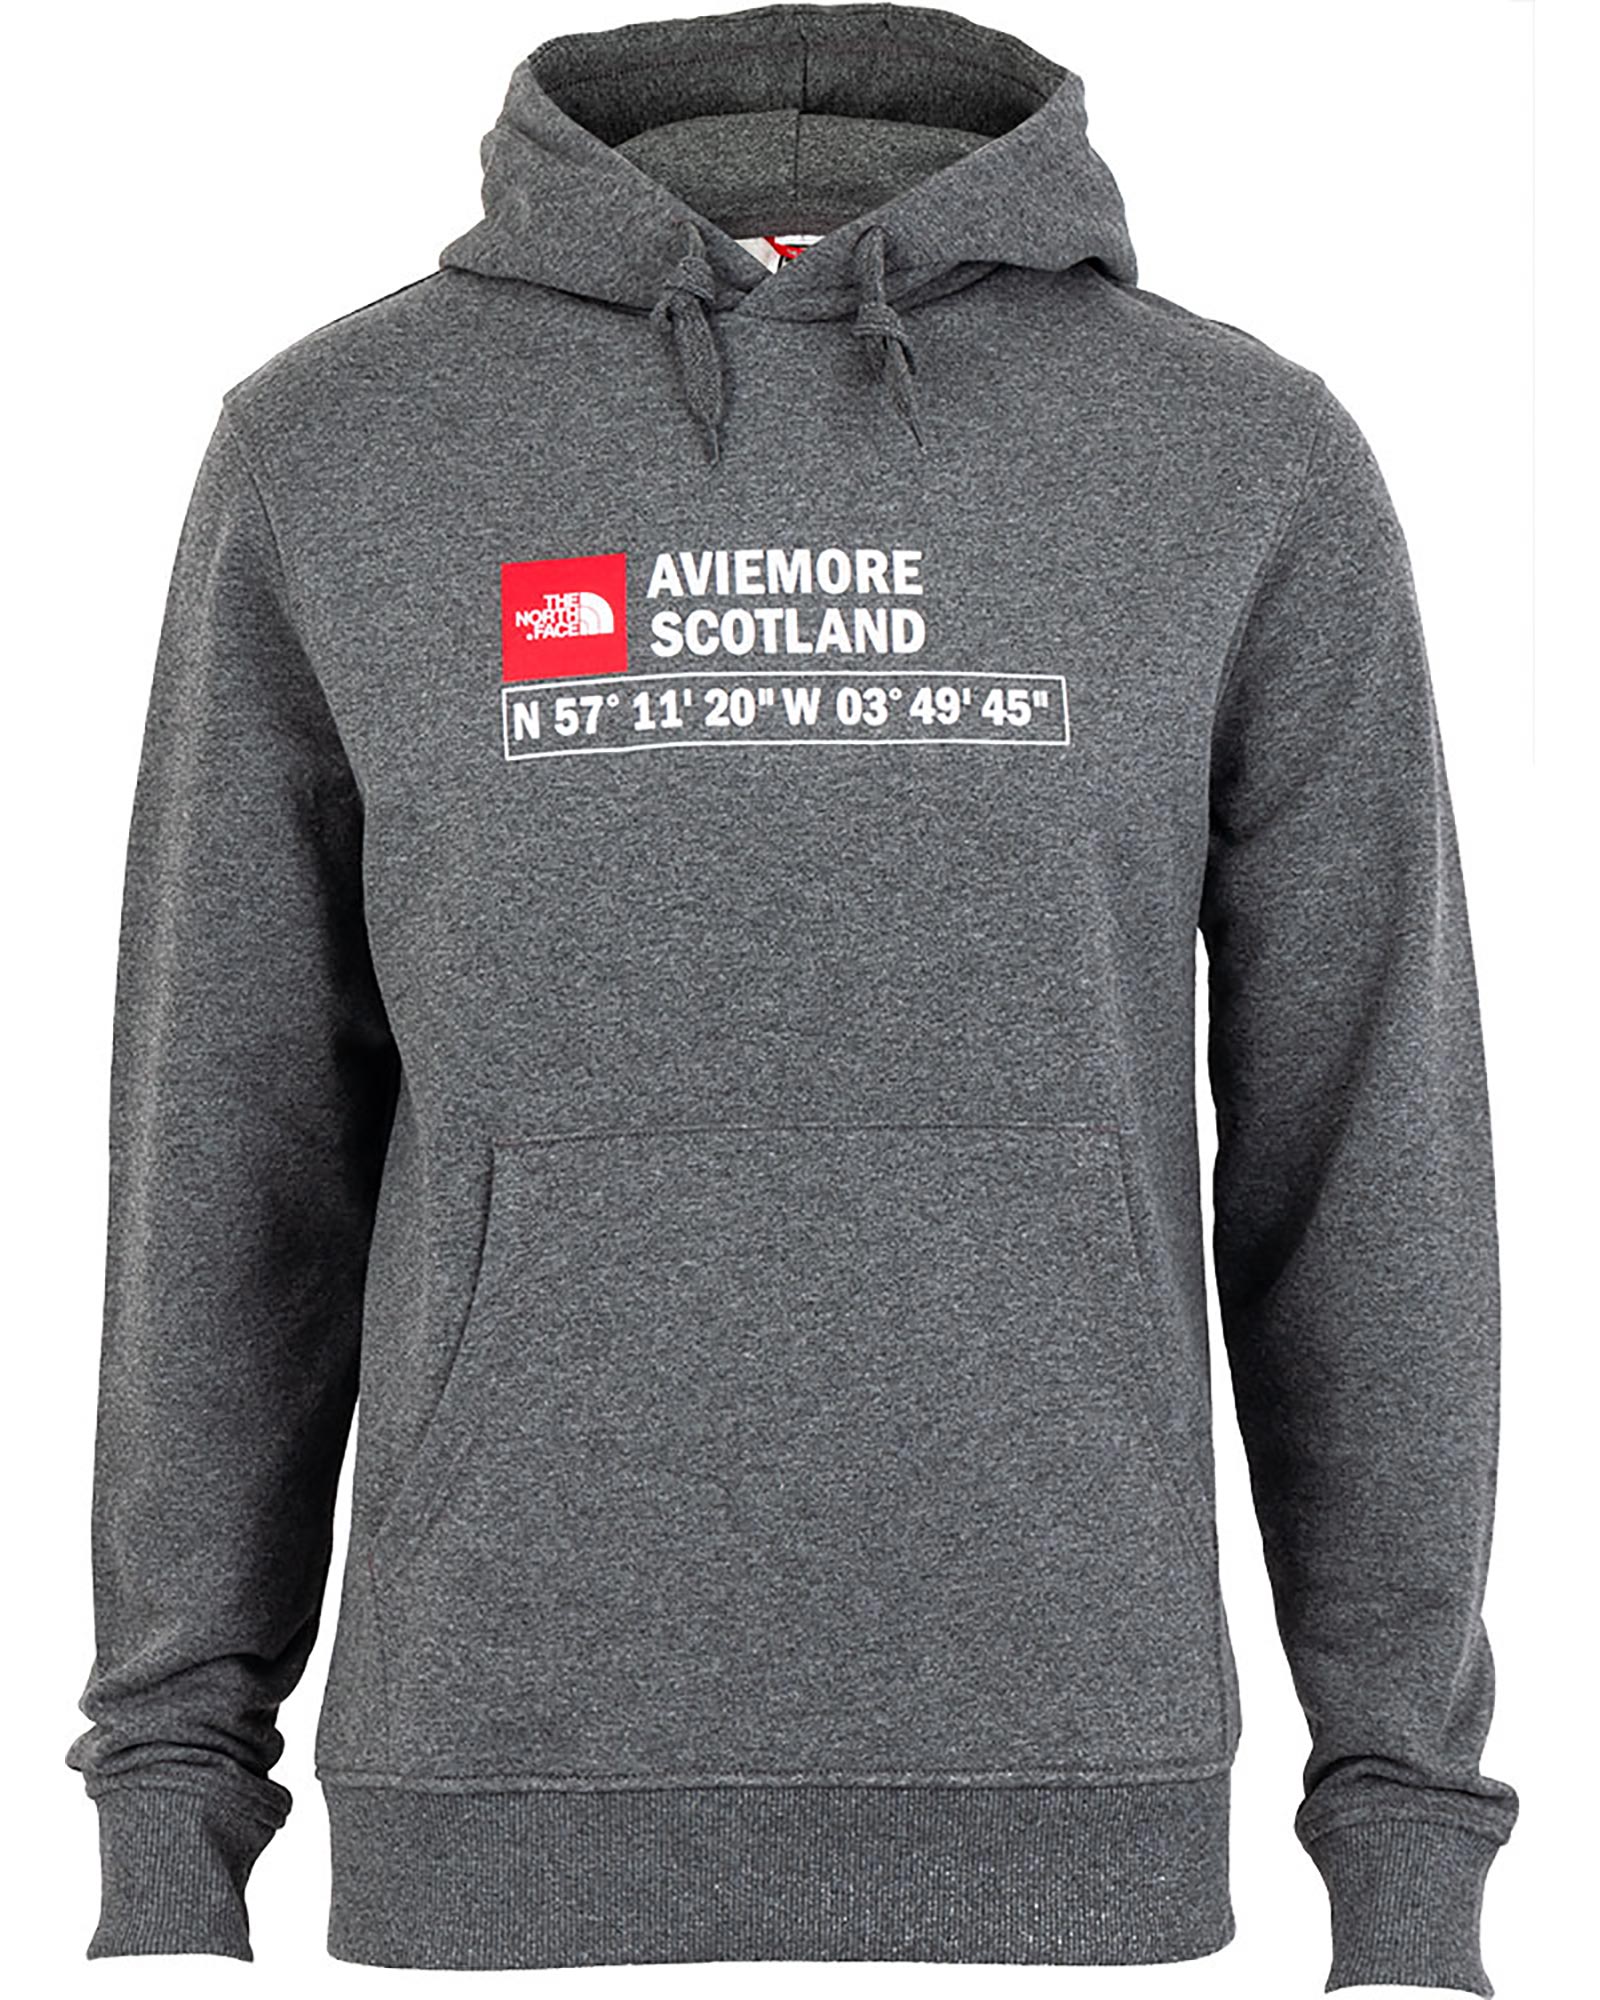 The North Face Aviemore Gps Mens Hoodie